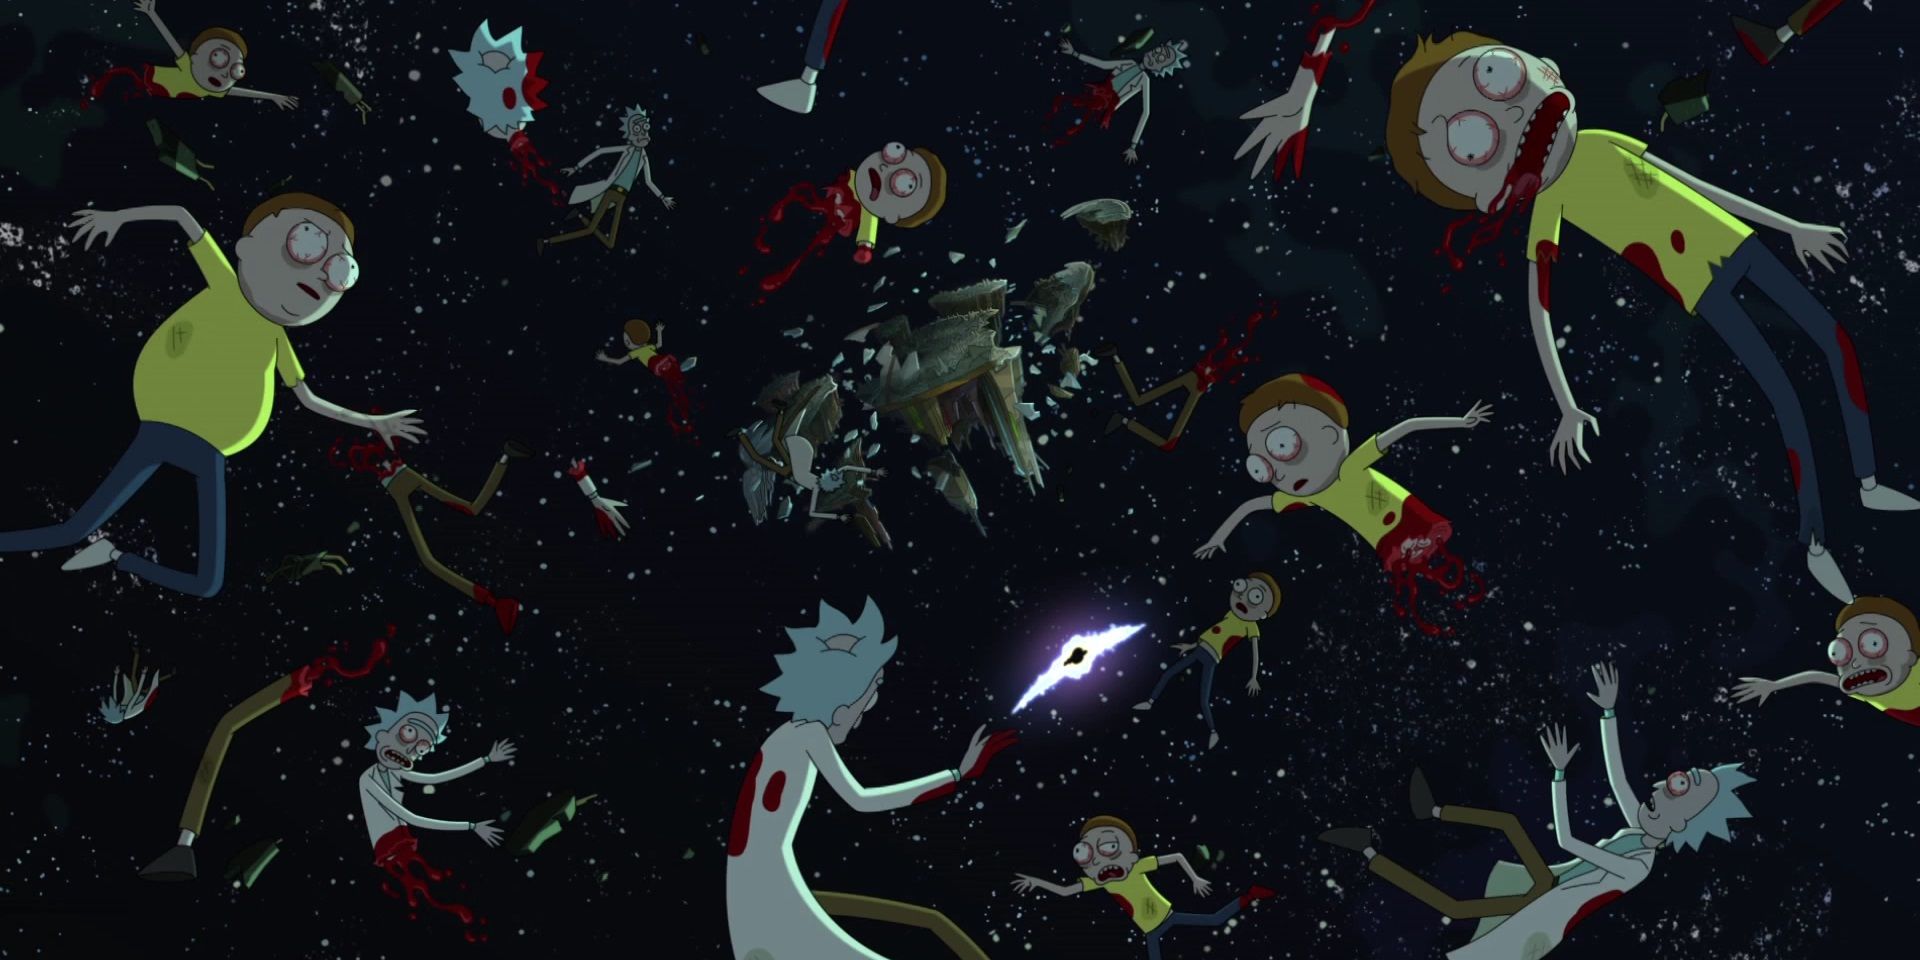 Dead Ricks and Mortys floating through space in Rick and Morty